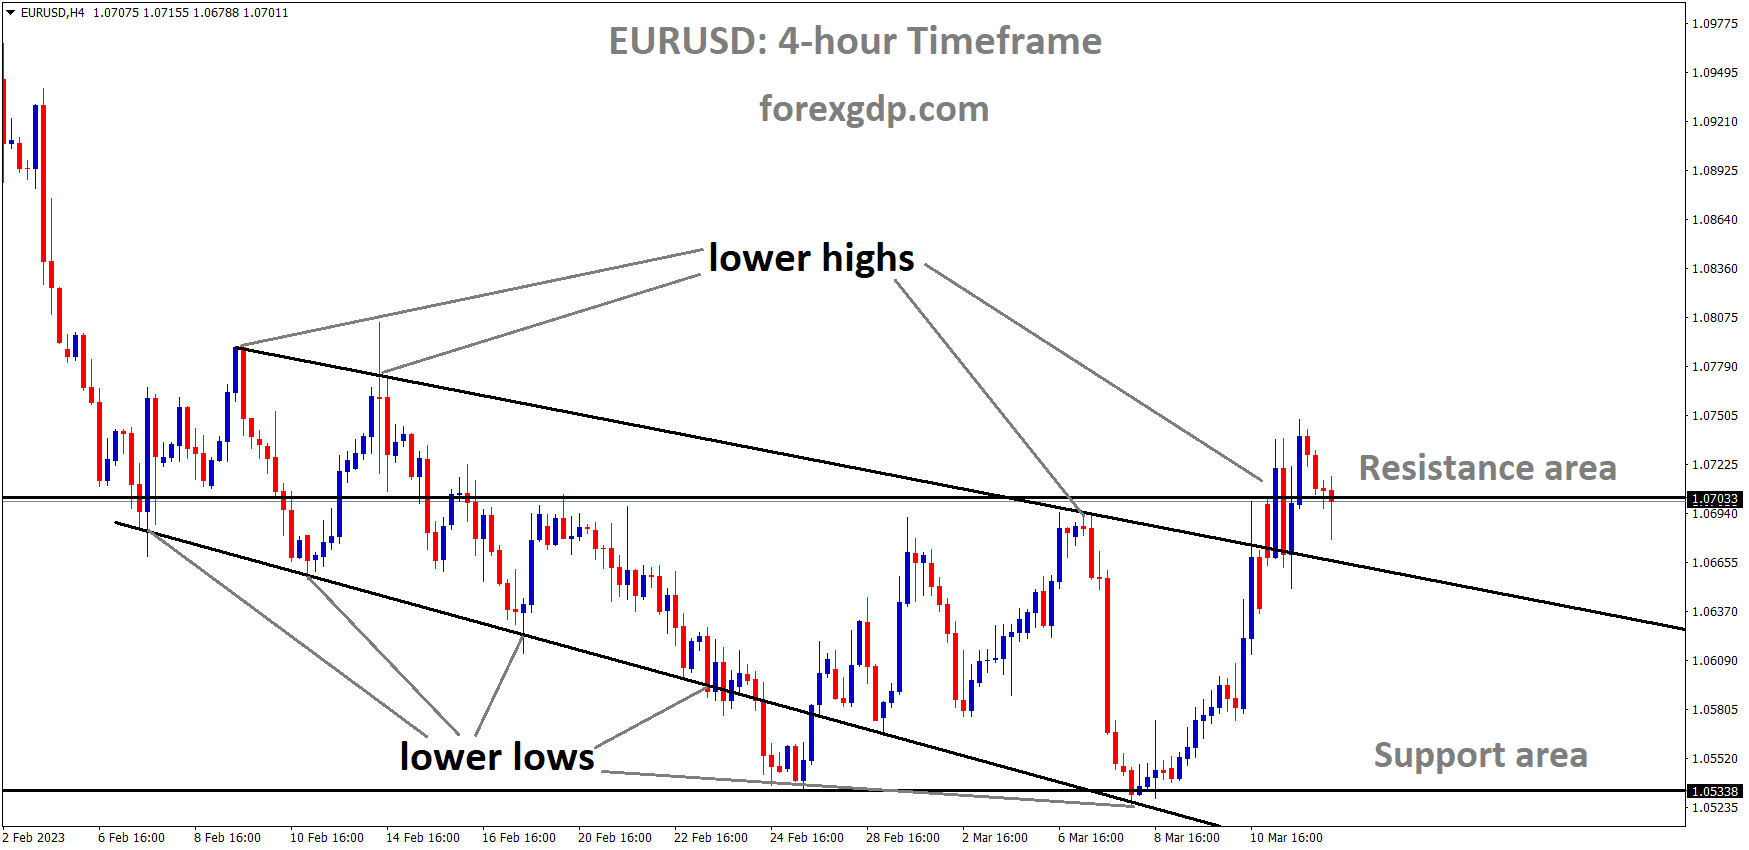 EURUSD is moving in the Descending channel and the market has reached the lower high area of the channel 3